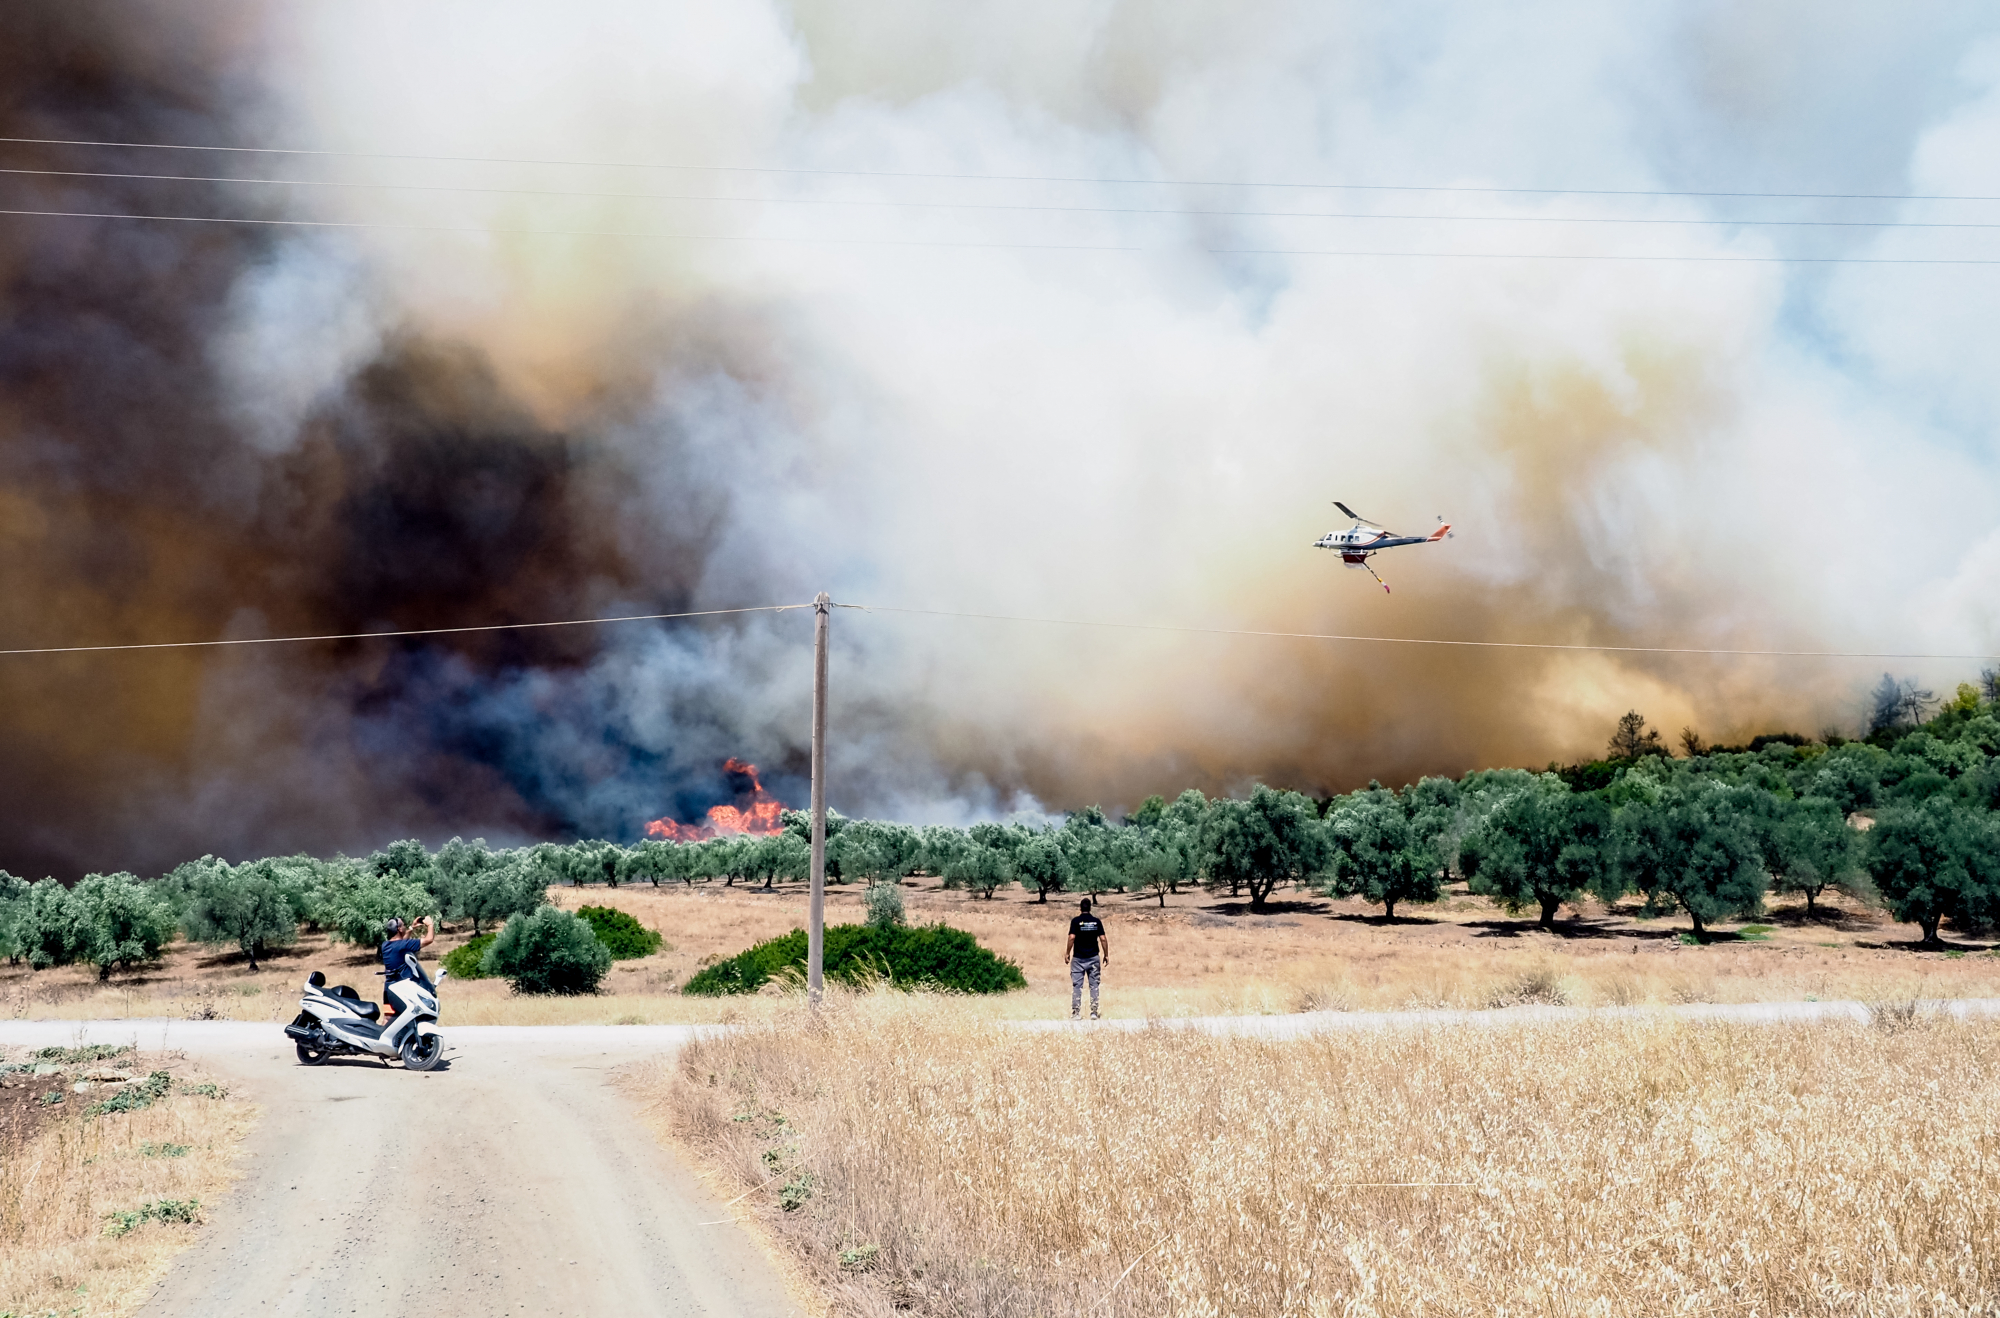 Several major wildfires in Greece over last 2 days amid hot, arid and windy conditions